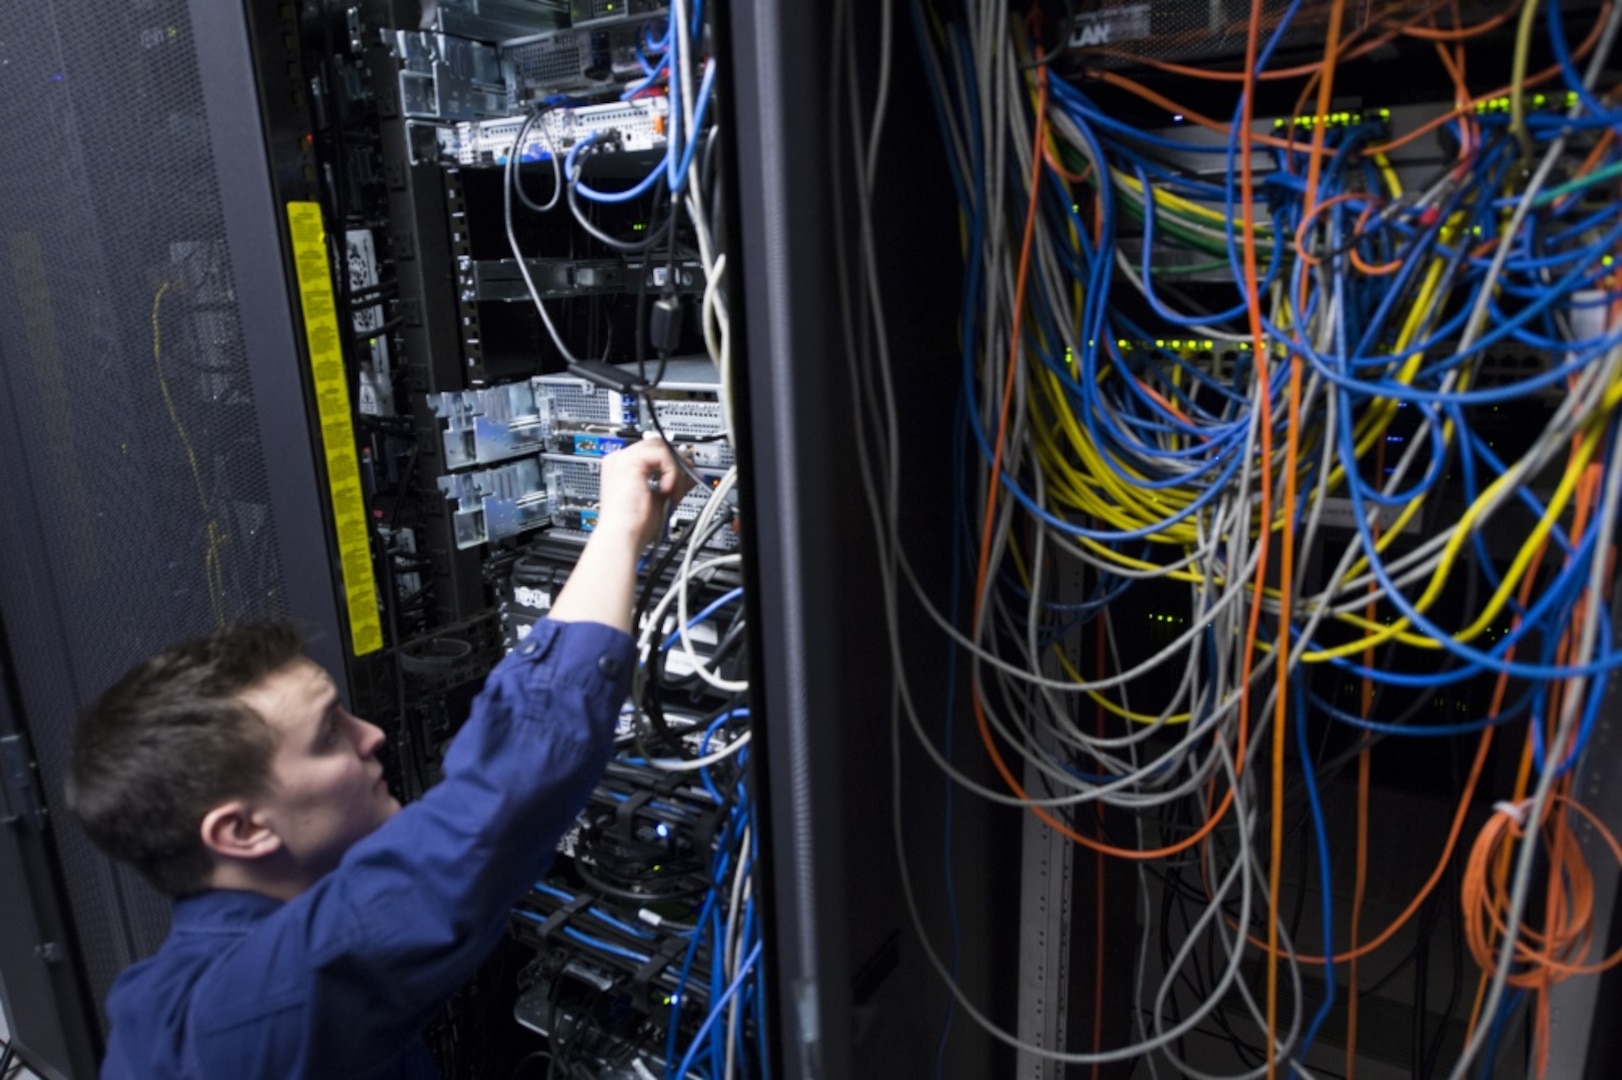 ALEXANDRIA, Va. - A Coast Guard Information Systems Technician adjusts cables inside a server room at the Telecommunication and Information Systems Command (TISCOM) Jan. 24, 2013. ITs are responsible for establishing and maintaining Coast Guard computer systems, analog and digital voice systems (telephones and voicemail), and installing and maintaining the physical network infrastructure that ties the systems together. U.S. Coast Guard photo by Petty Officer 2nd Class Etta Smith